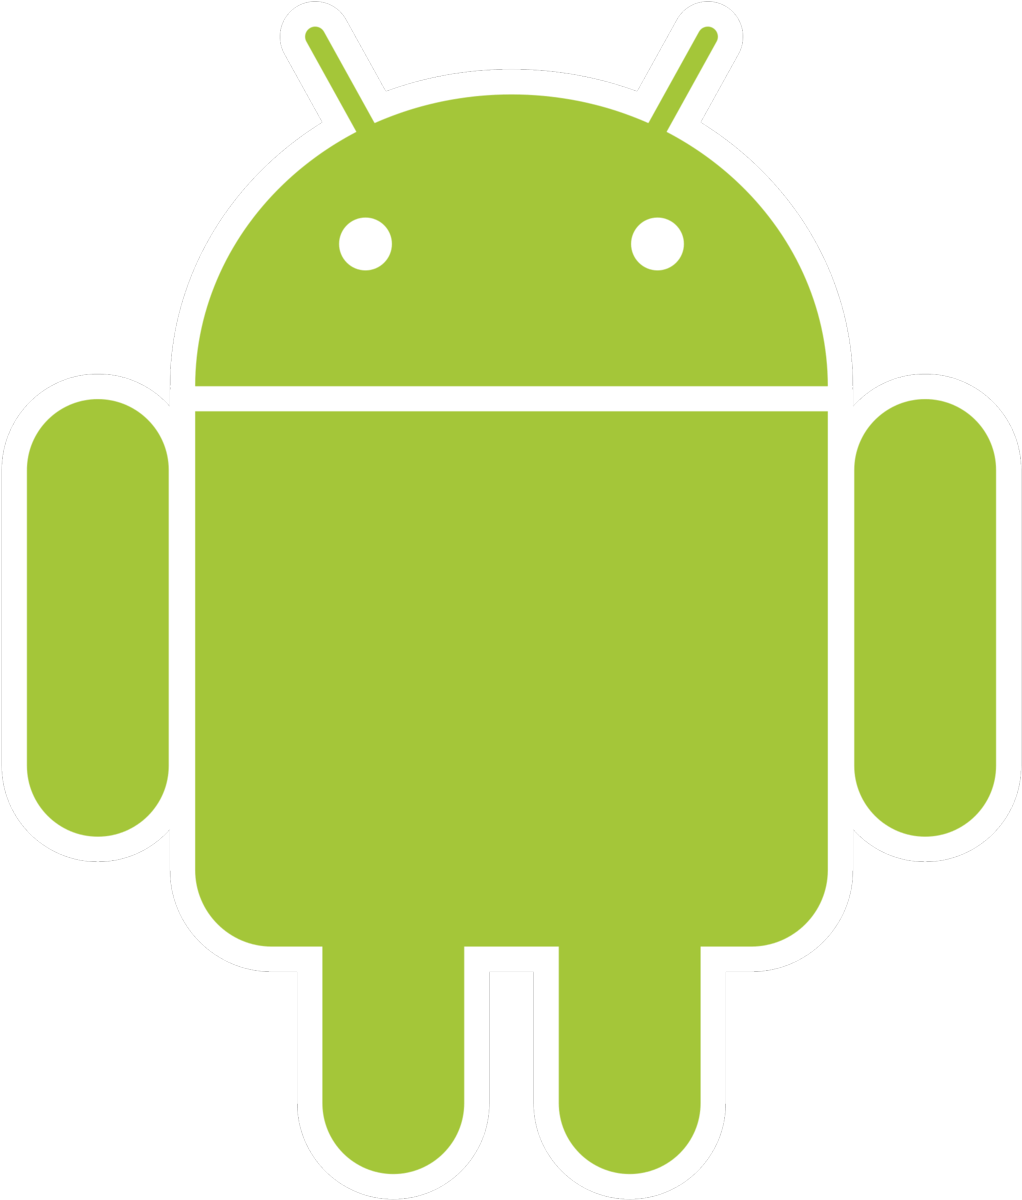 android robot svg - Don’t Put Too Much Stock in Android’s Dominant Market Share